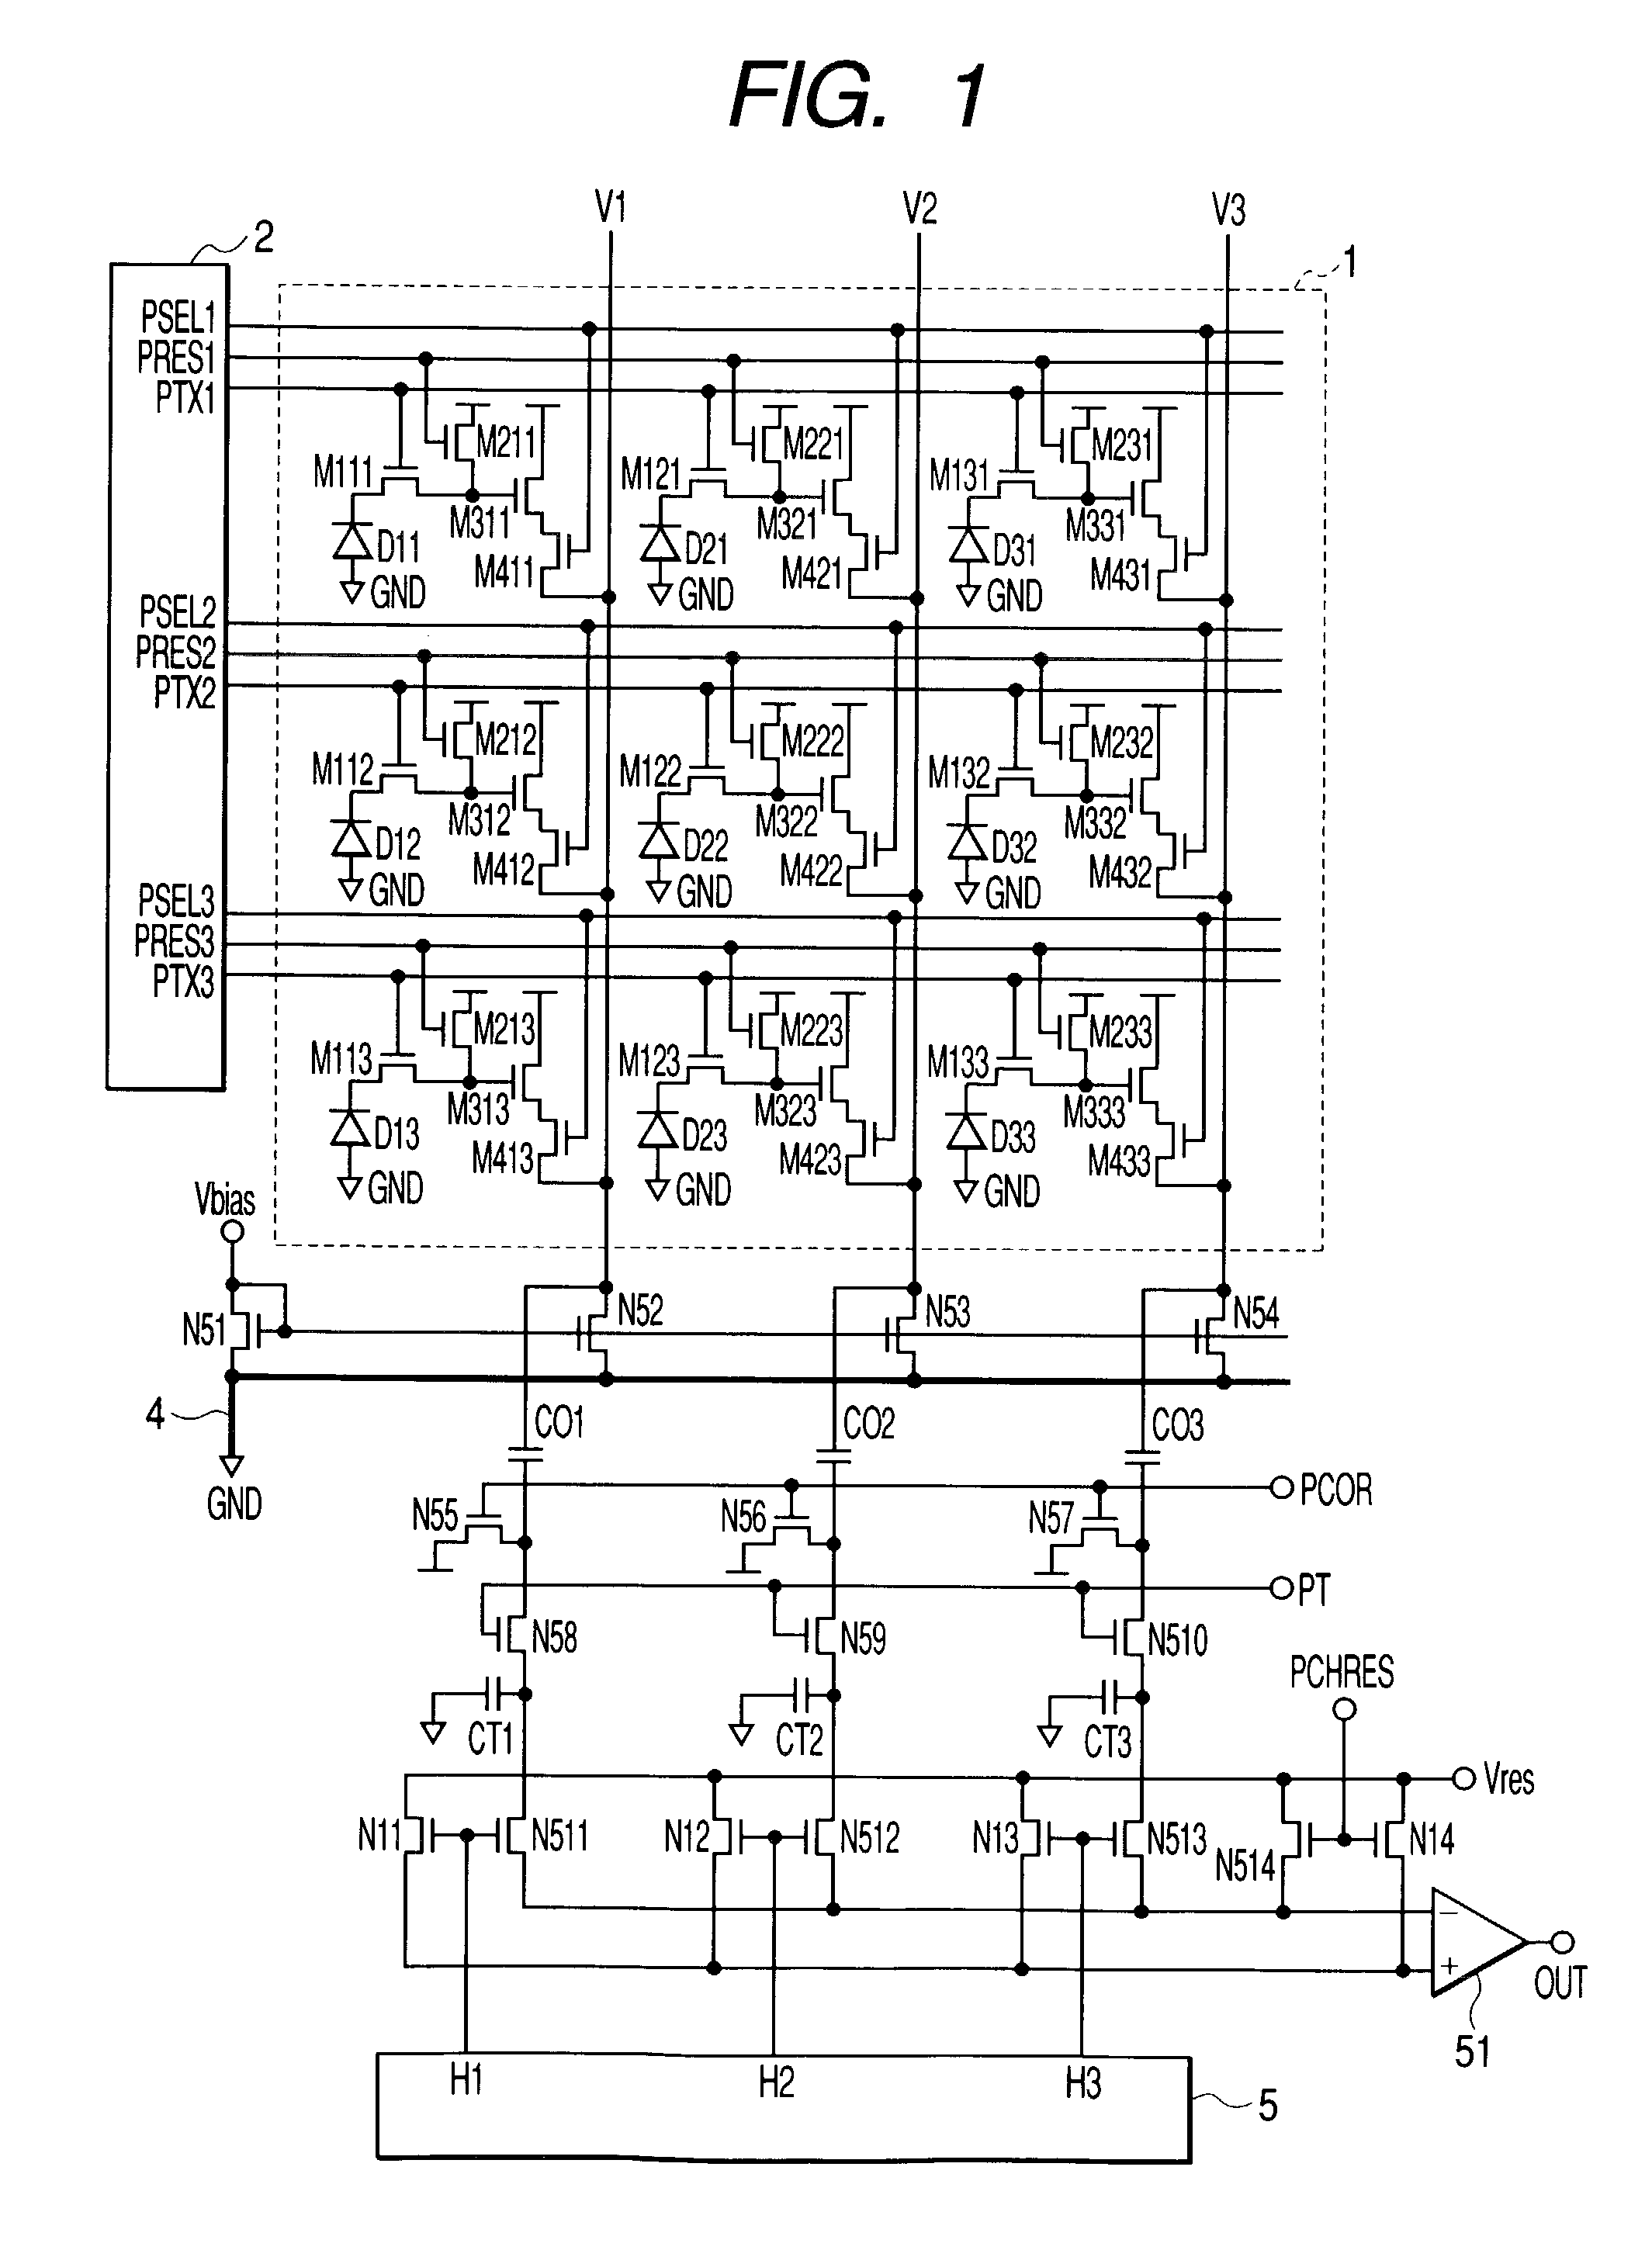 Solid-state image pickup apparatus having a differential output